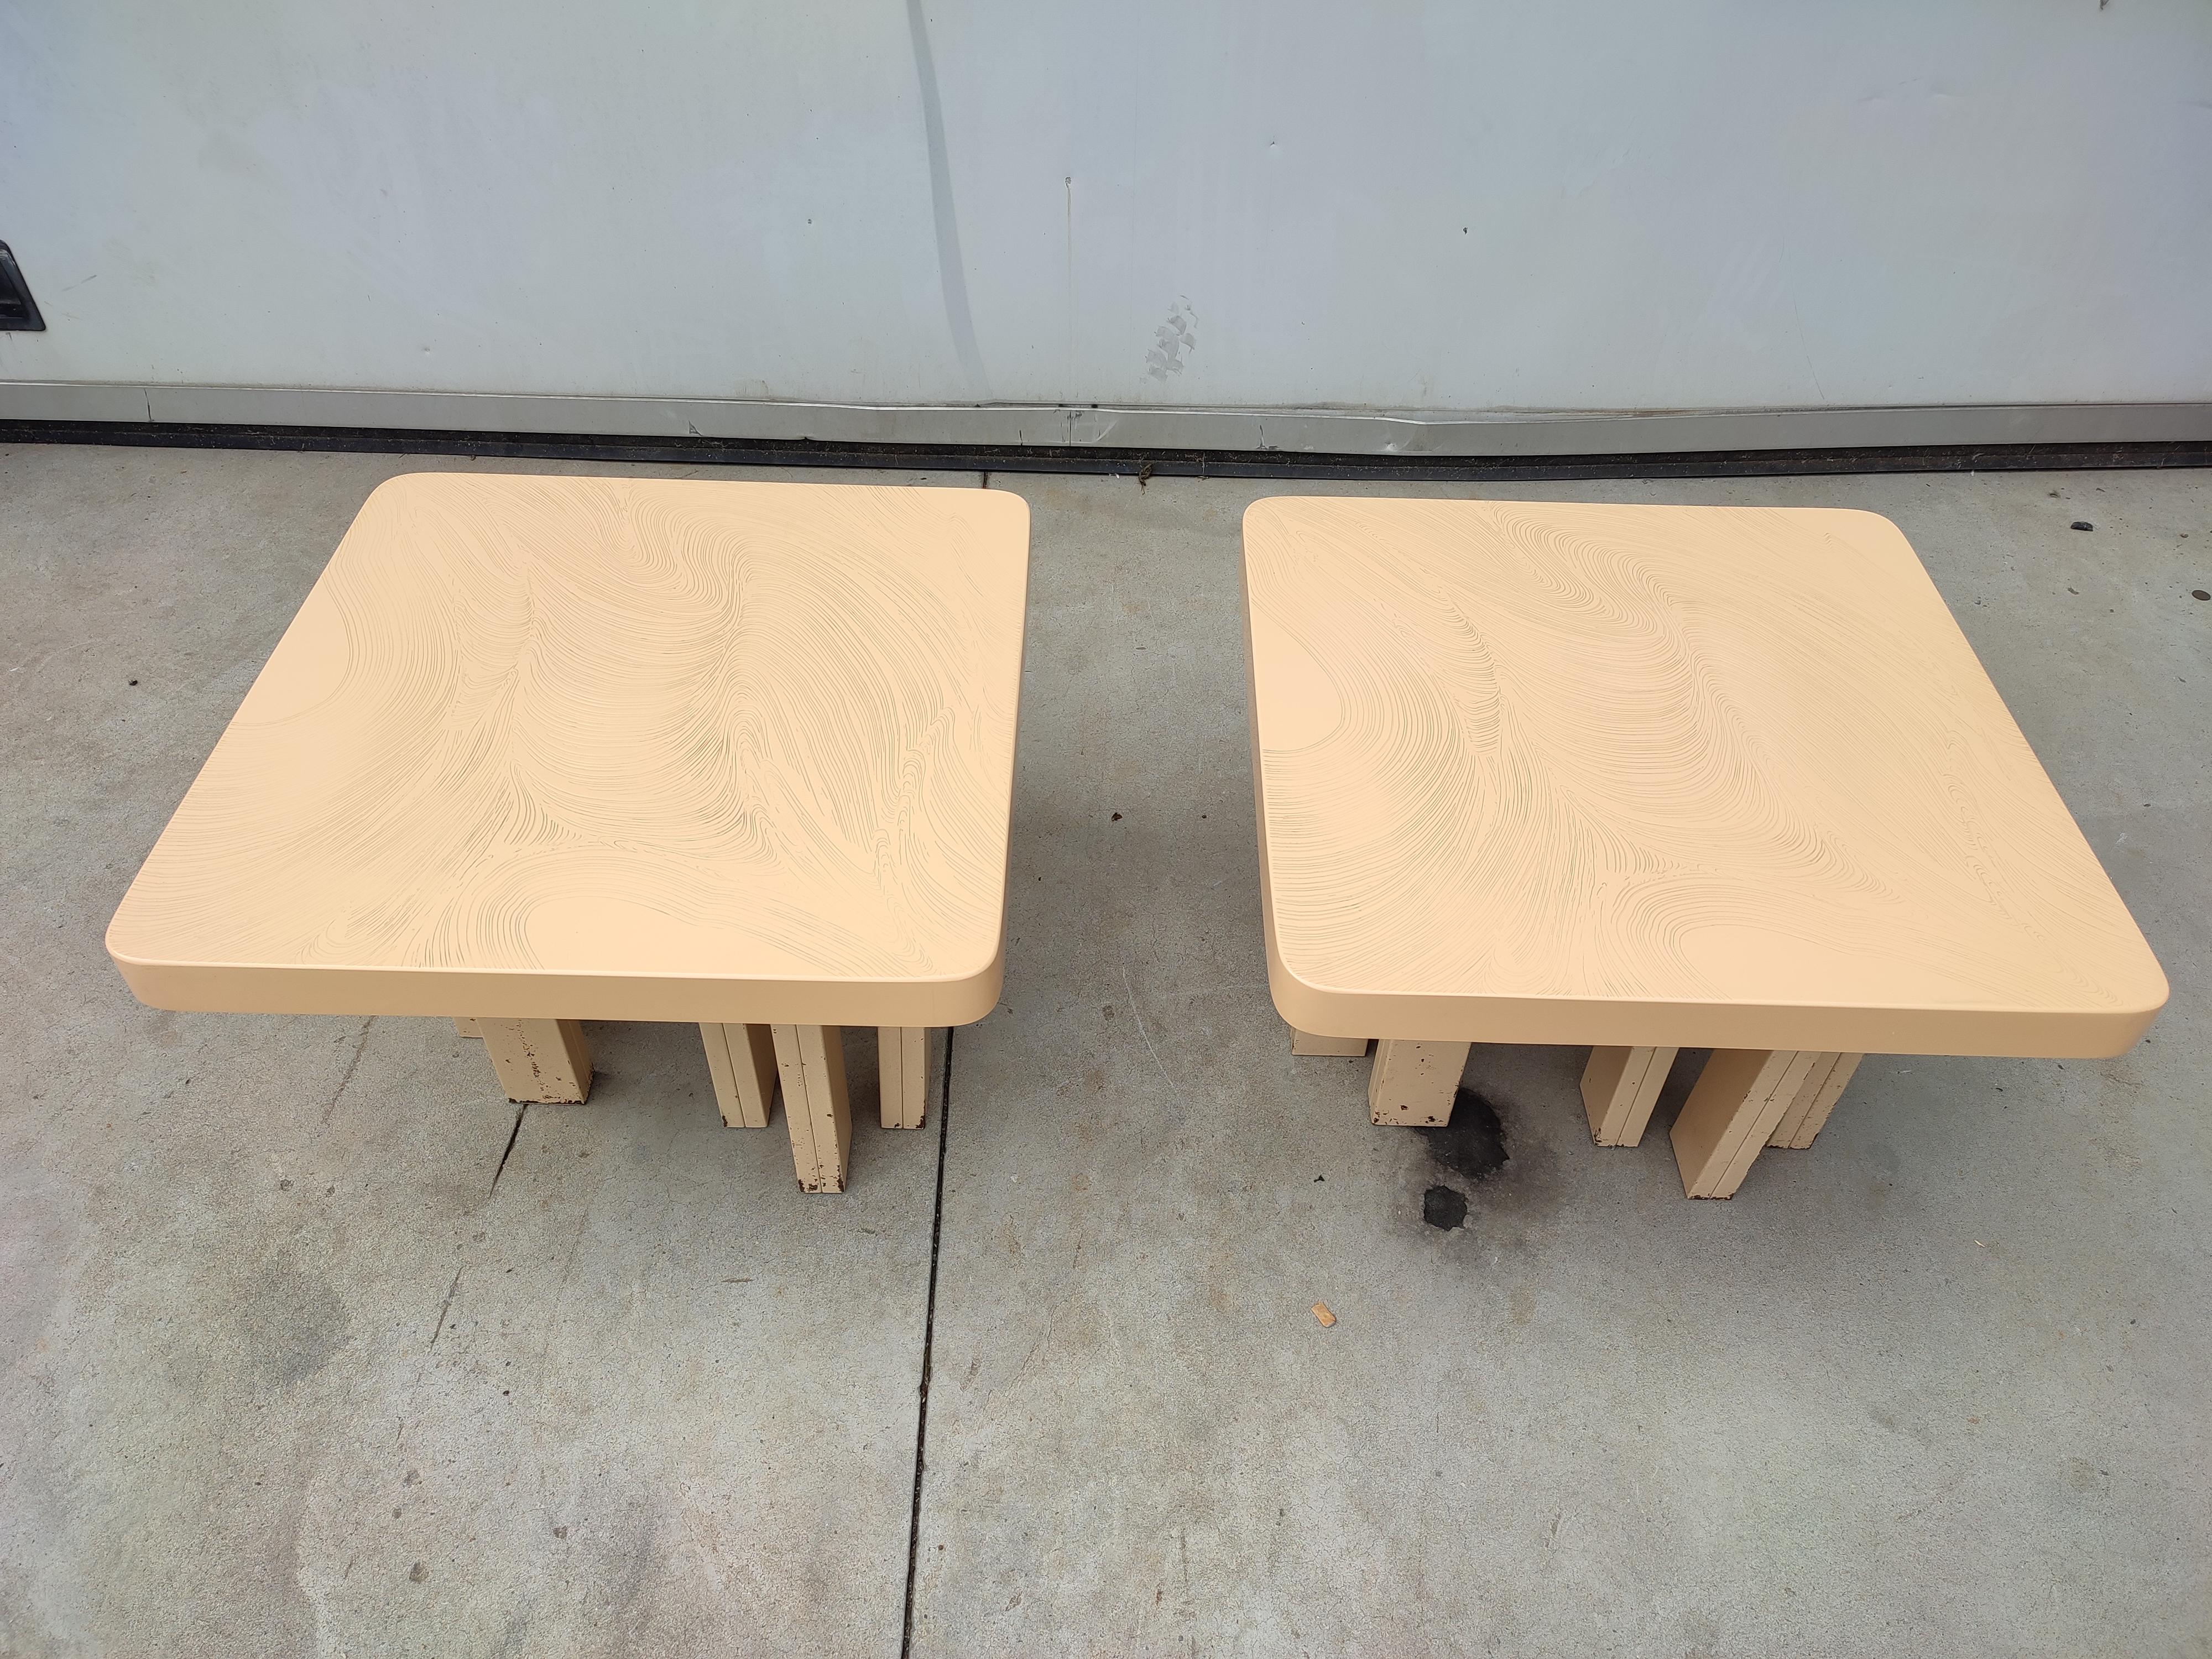 Mid-Century Modern White Cream Resin Pair of Side Tables from Jean Claude Dresse, Belgium, 1970s For Sale